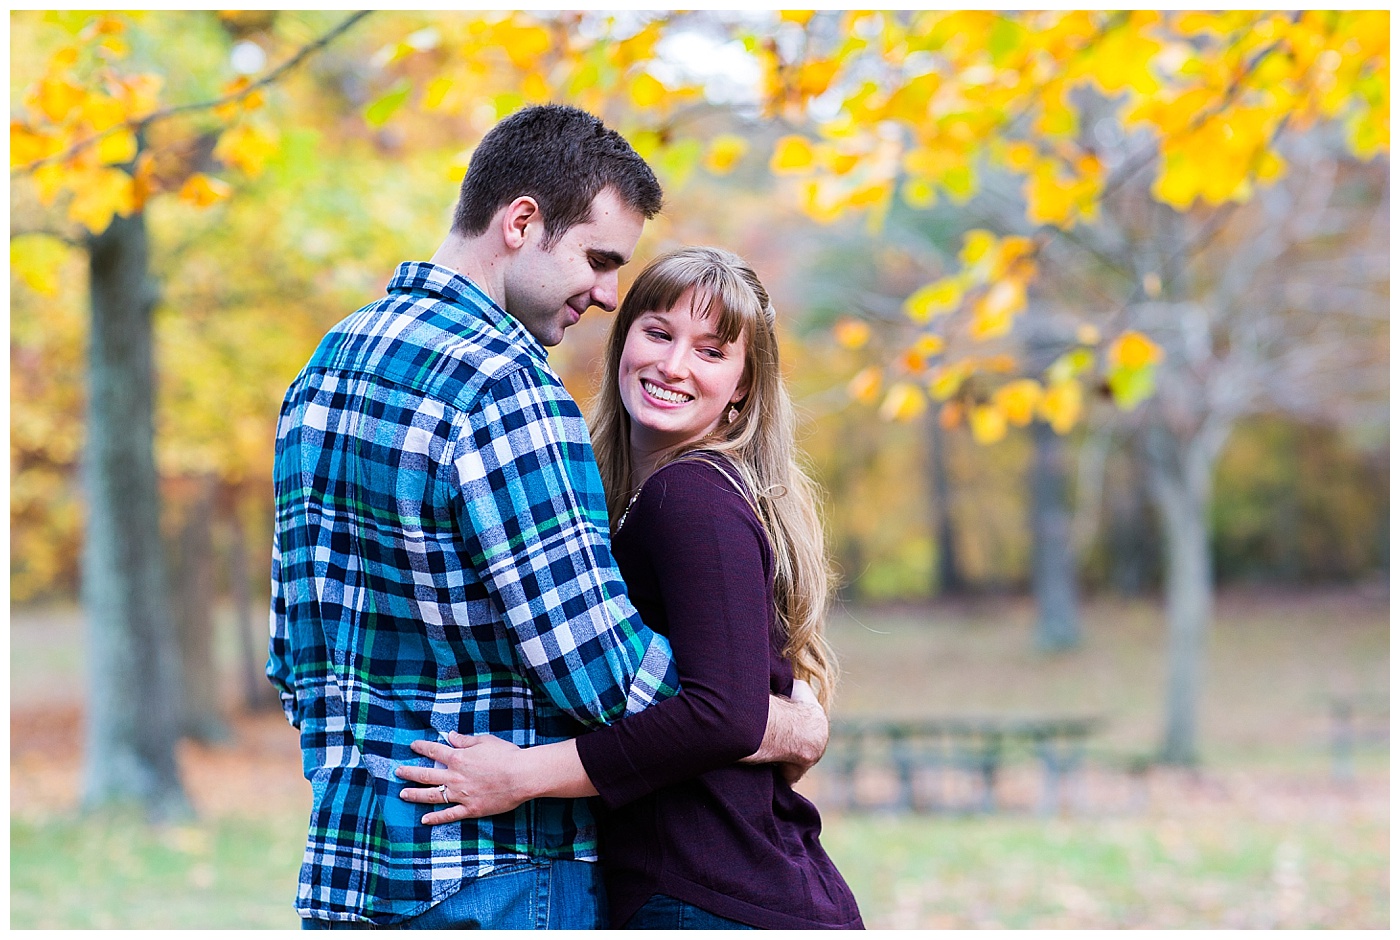 A colorful fall engagement session at quiet waters park in Annapolis, Maryland.